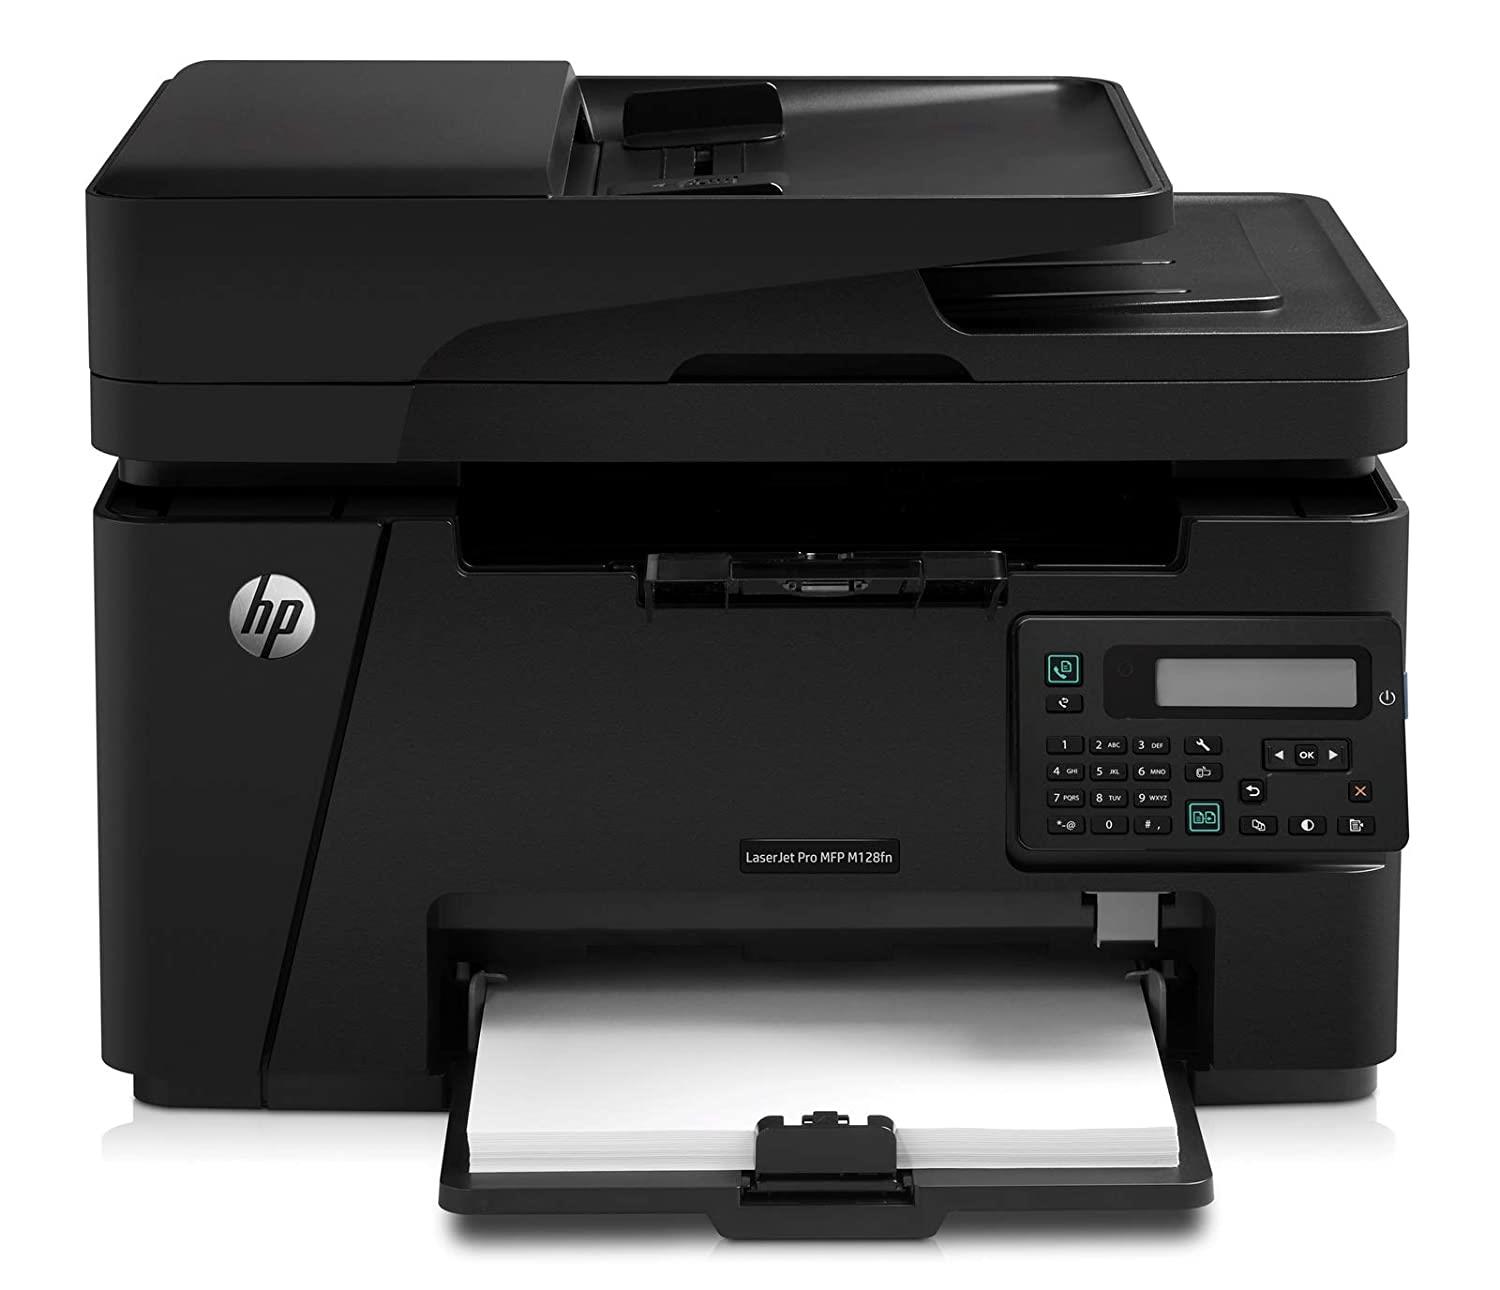 HP MFP M128fn Laserjet Printer: Print, Copy, Scan, Automatic Document Feeder, Ethernet, Fast Printing Upto 20Ppm, Easy And Secure Setup, 3Yearwarranty